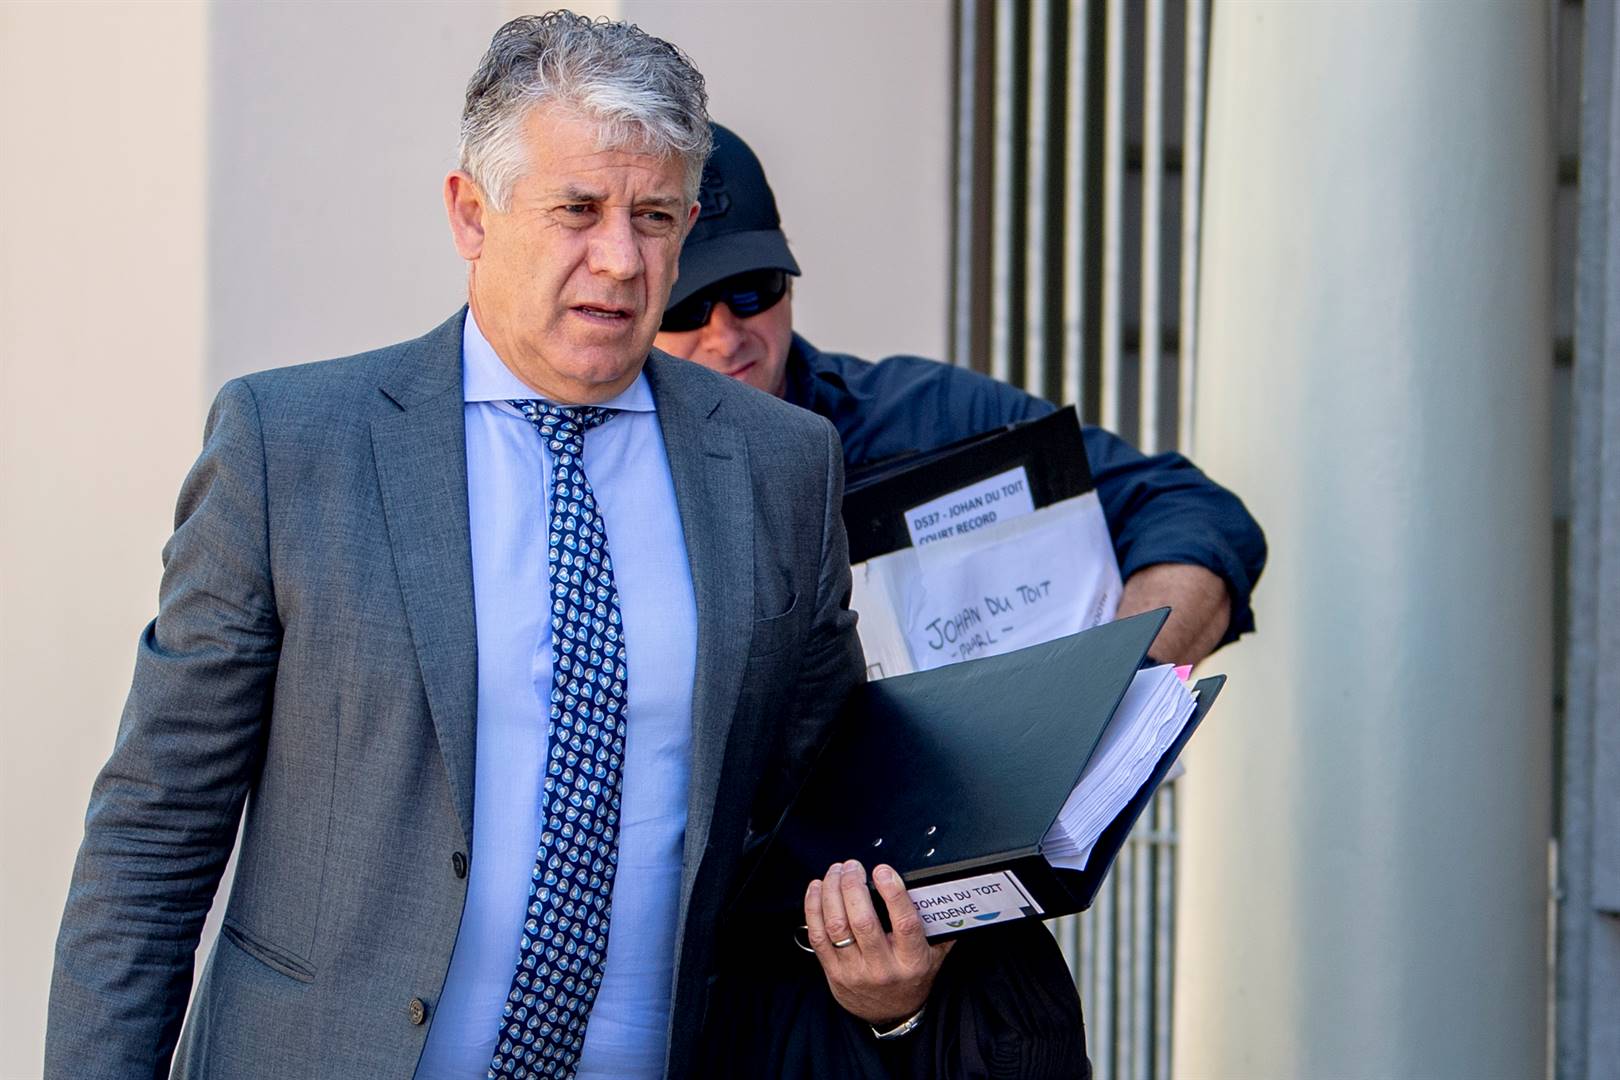 A sleepy hitman, an Uber, and falling in a hole: The 7 bungled attempts on Cape Town lawyer's life | News24